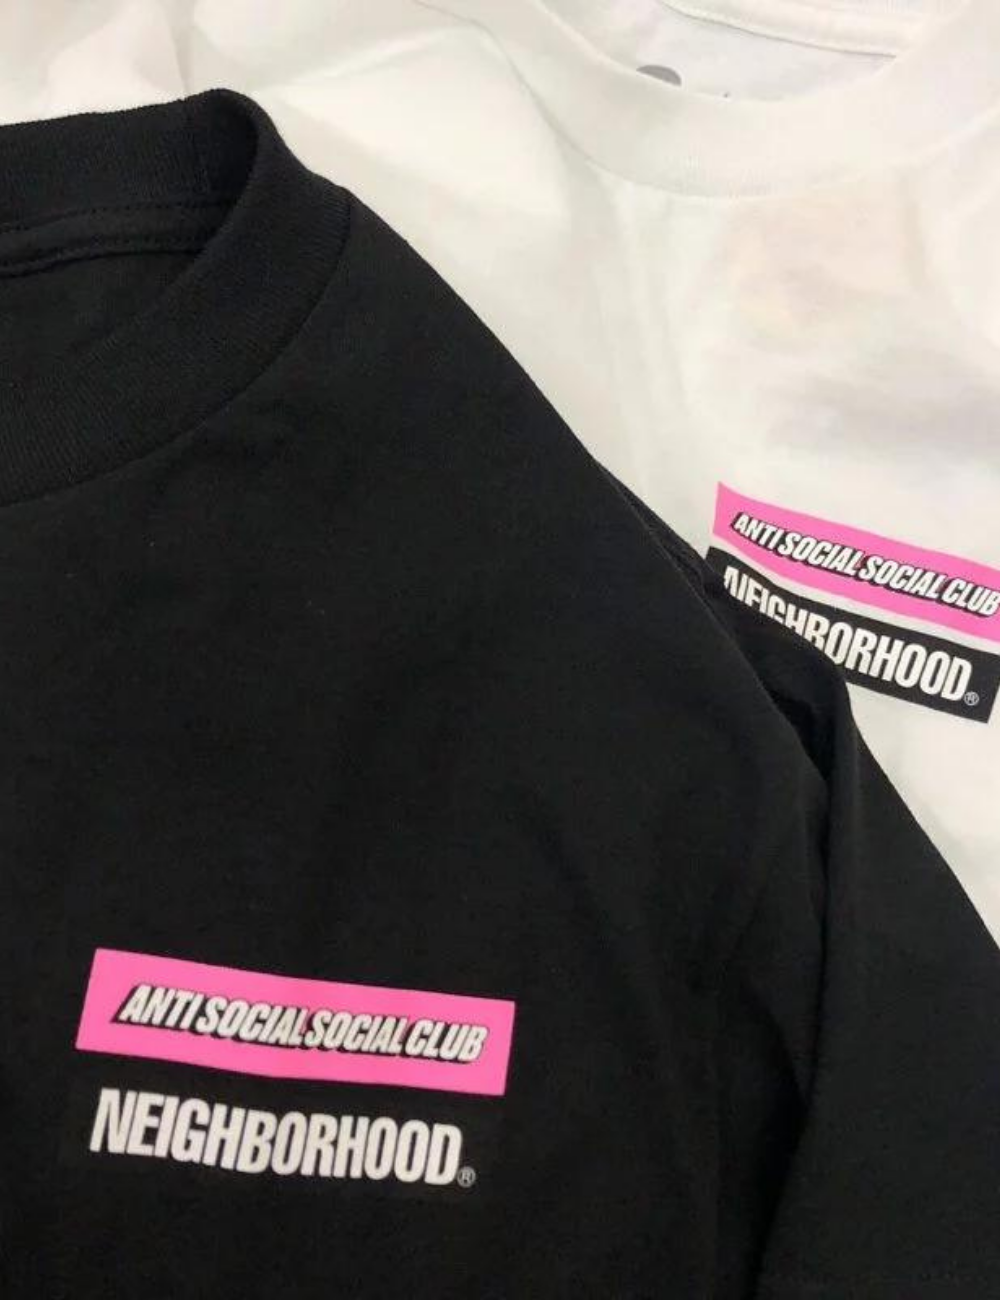 Anti Social Social Club x Neighborhood 'Stuck On You' Tee (White) - Shop Streetwear, Sneakers, Slippers and Gifts online | Malaysia - The Factory KL